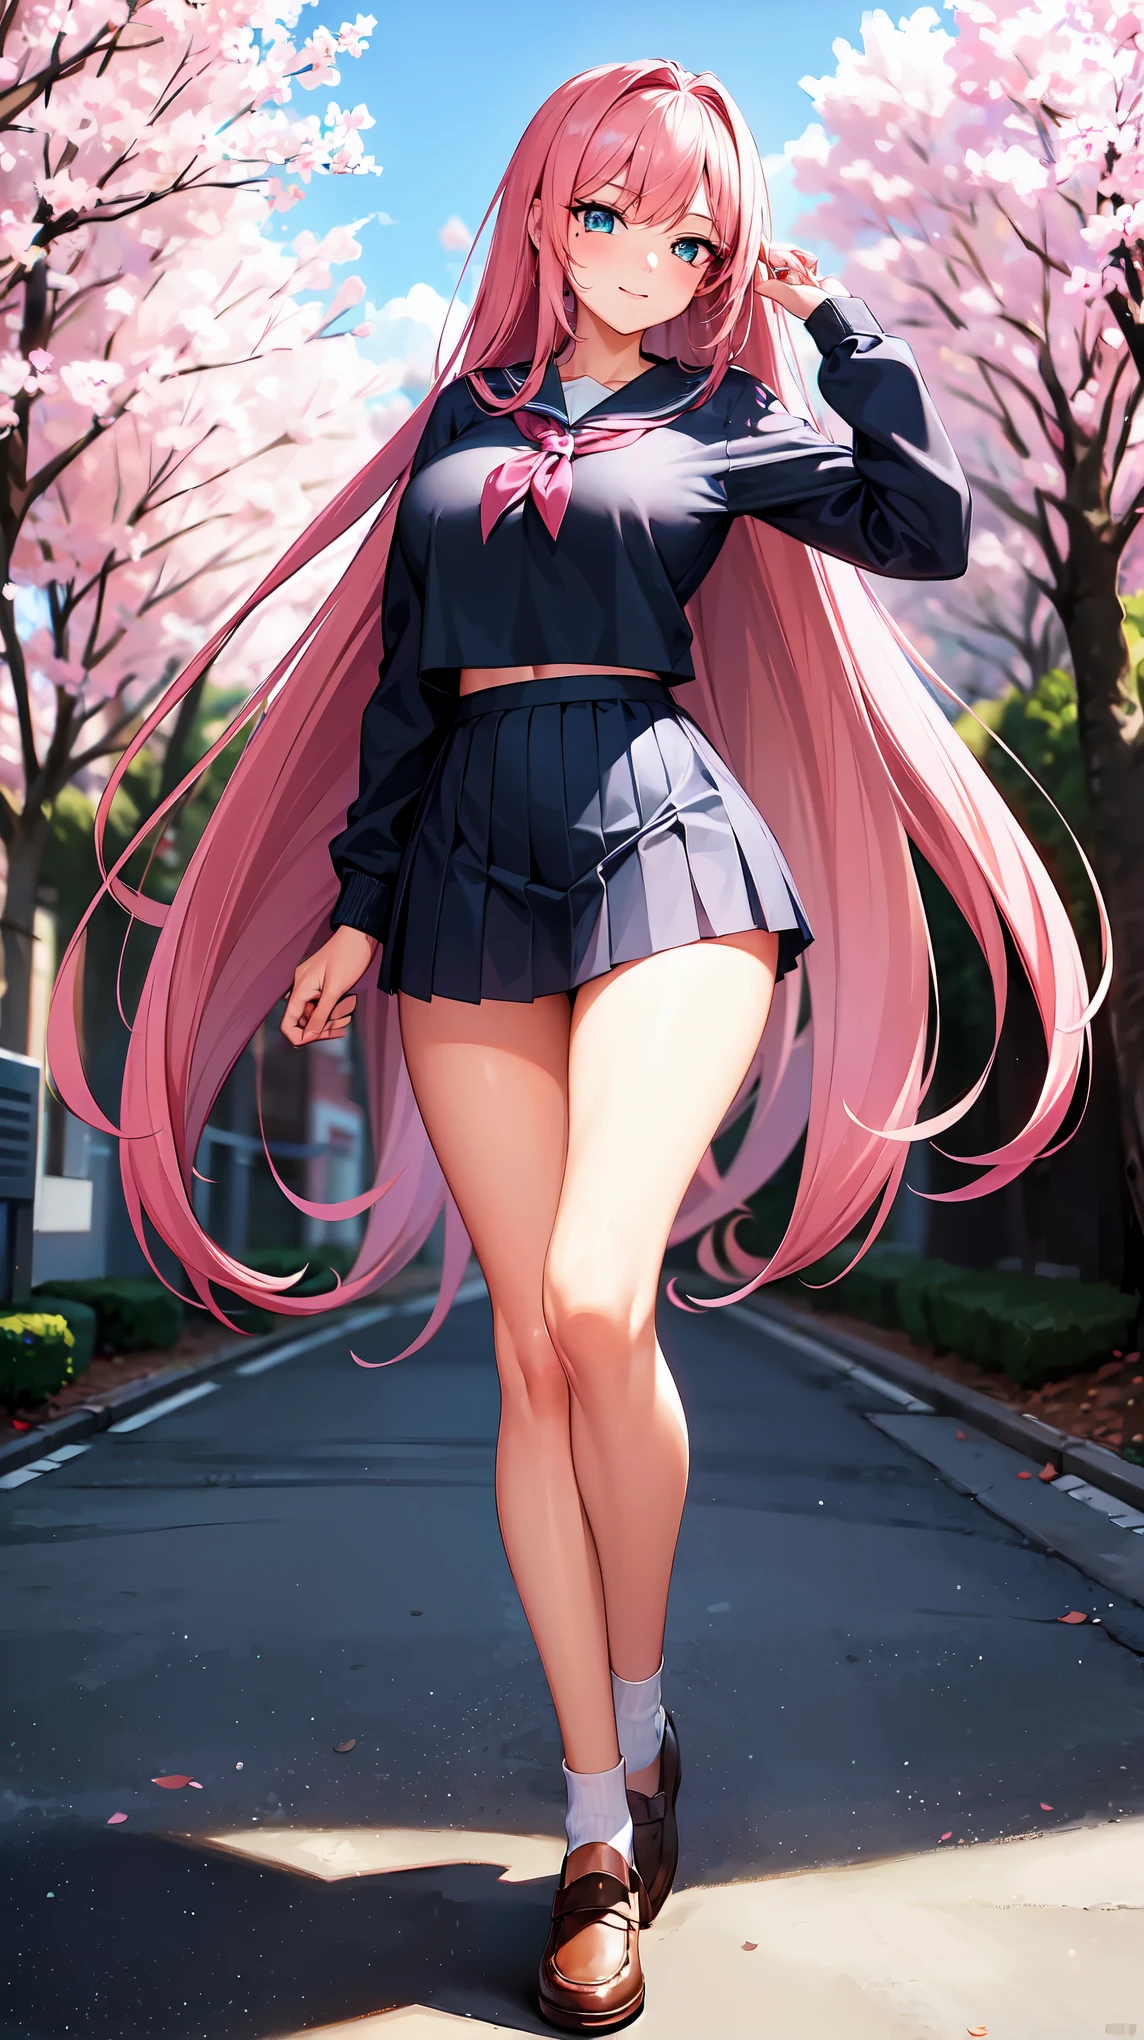 (gigantic breast), beautiful breast, best-quality, 8k quality, masterpiece, 1girl, high school girl, pink hair, long hair, beautiful detailed blue eyes, perfect eyes, full body, neat long sleeve school sailor suit, April, school zone, cherry blossom trees, lightsmile, front view, plain navy blue school skirt, school sailor scarf, perfect fingers, perfect anatomy, perfect face, sharp outline